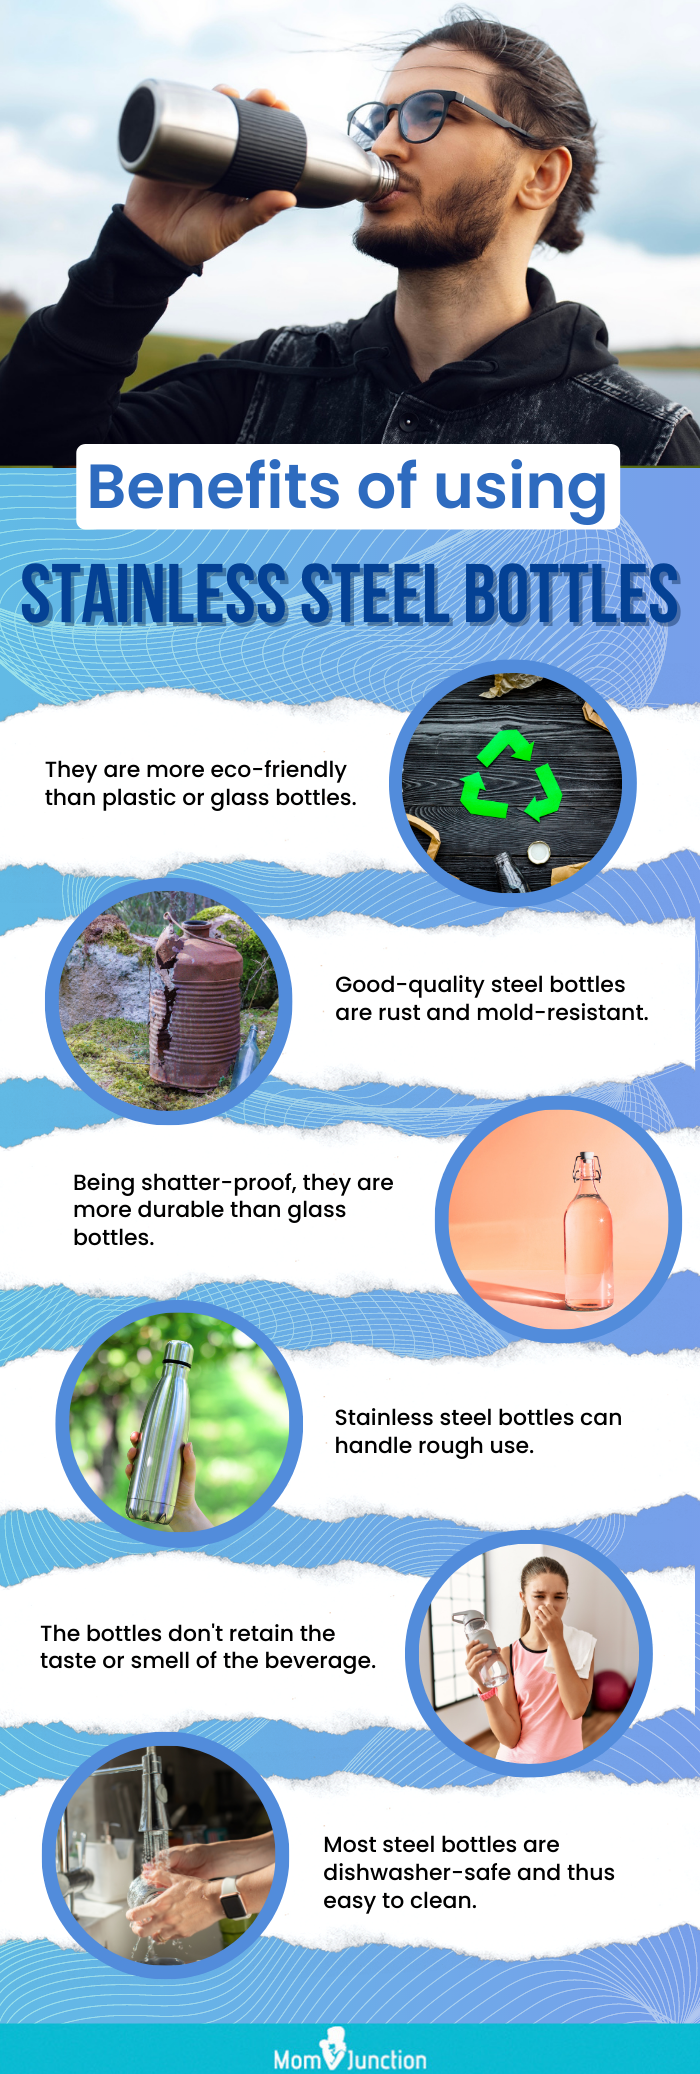 Benefits Of Using Stainless Steel Bottles (infographic)